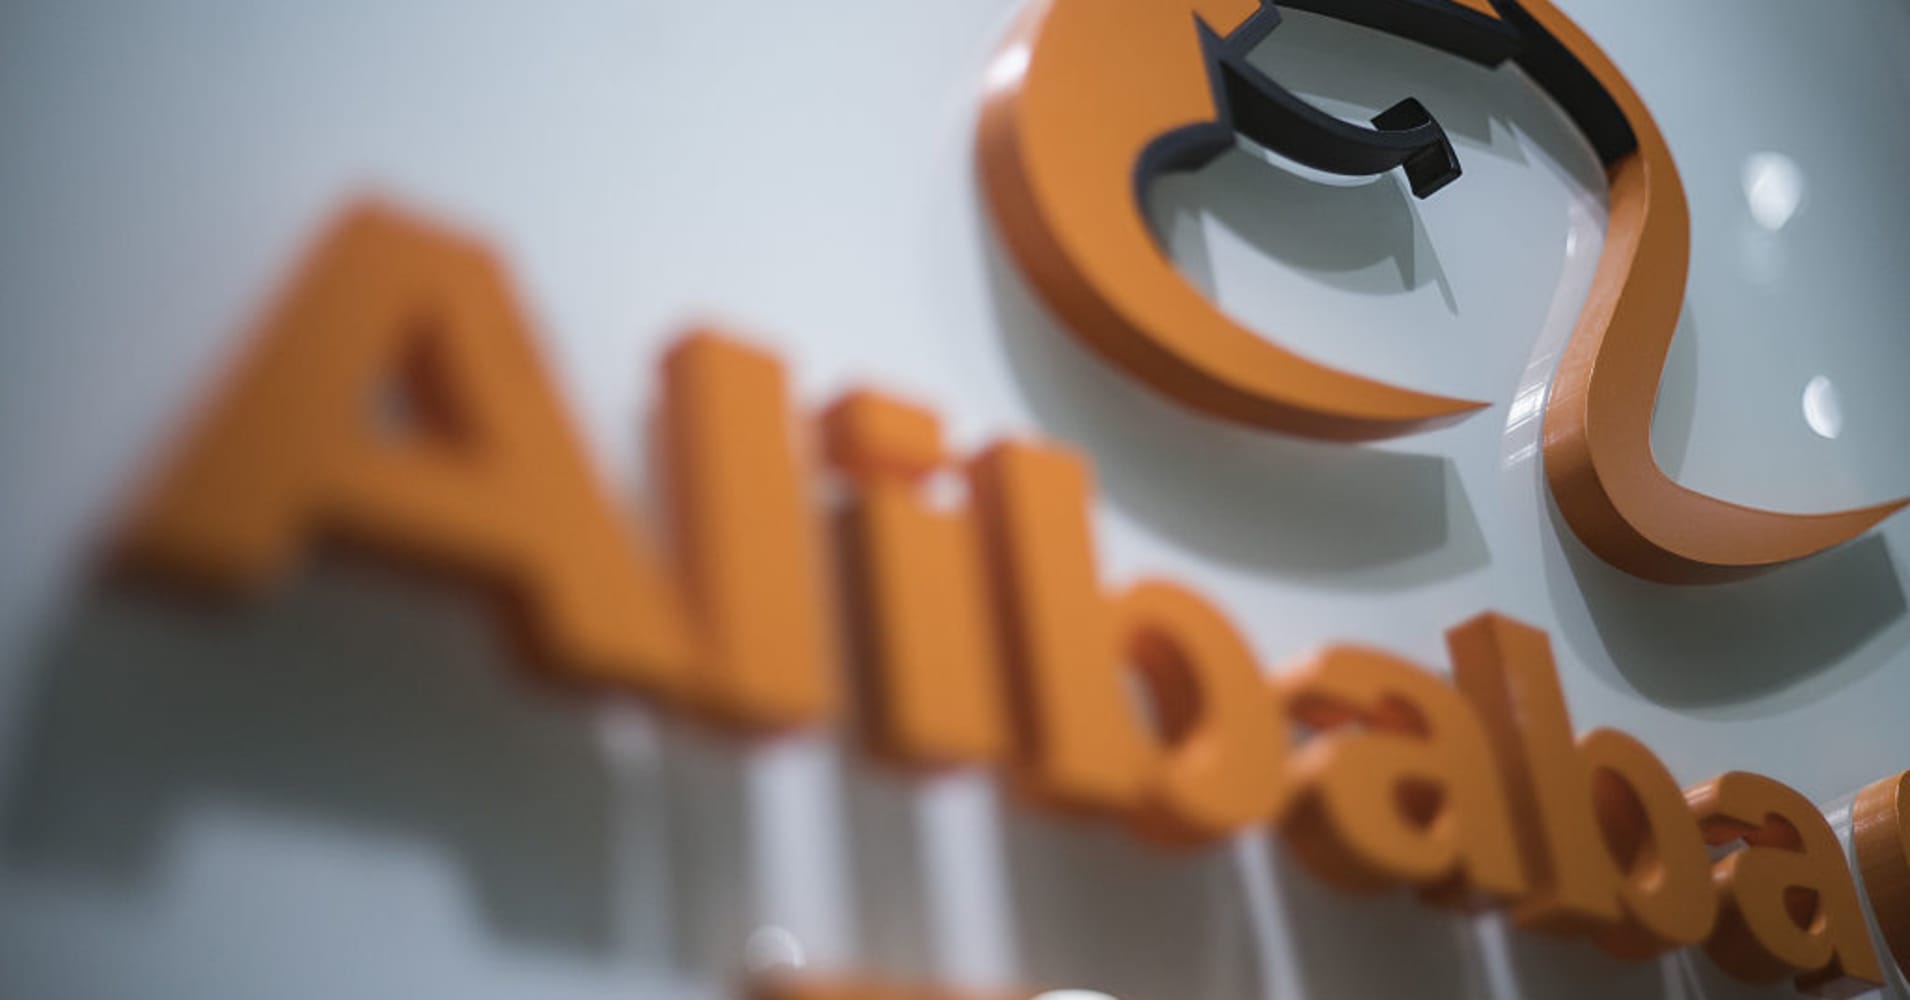 Alibaba is much more than just China's e-commerce platform